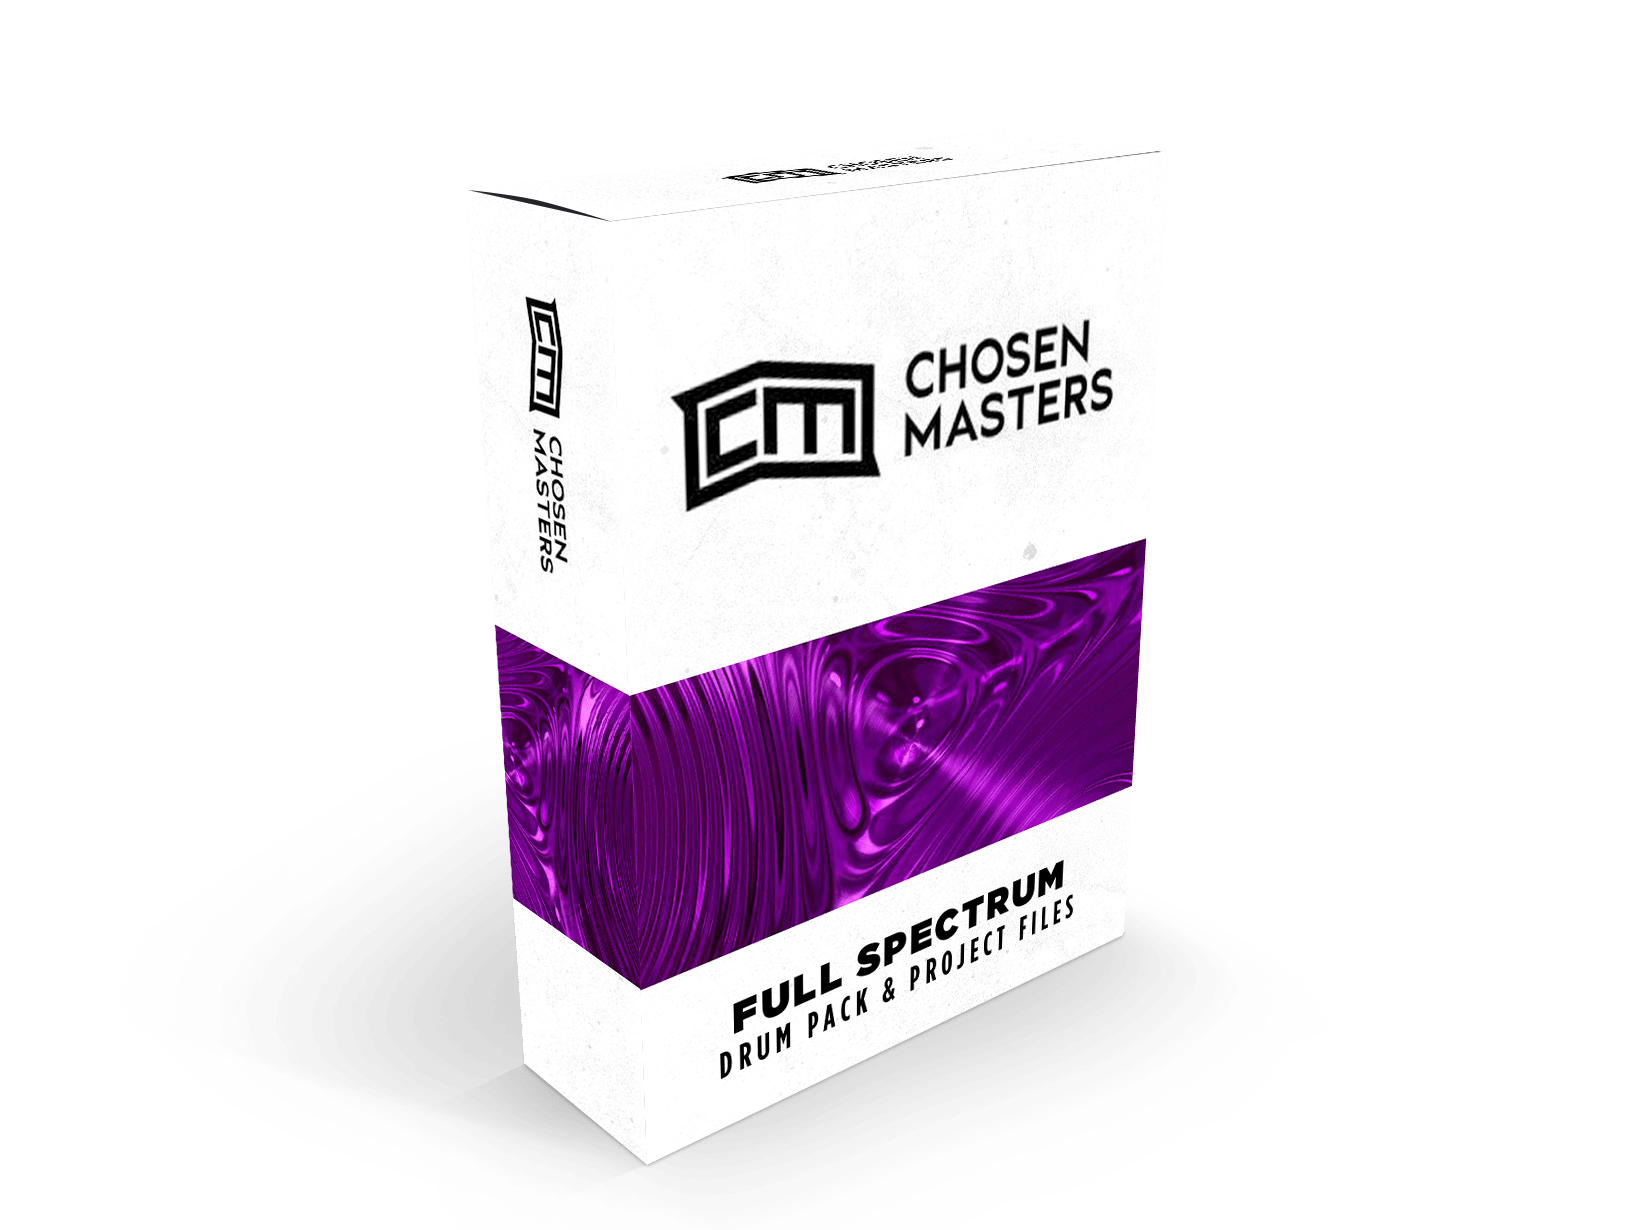 Massive Drum Pack and Ableton Template to write production-ready dance music like professionals. Includes over 250 samples and an epic Ableton Template session!